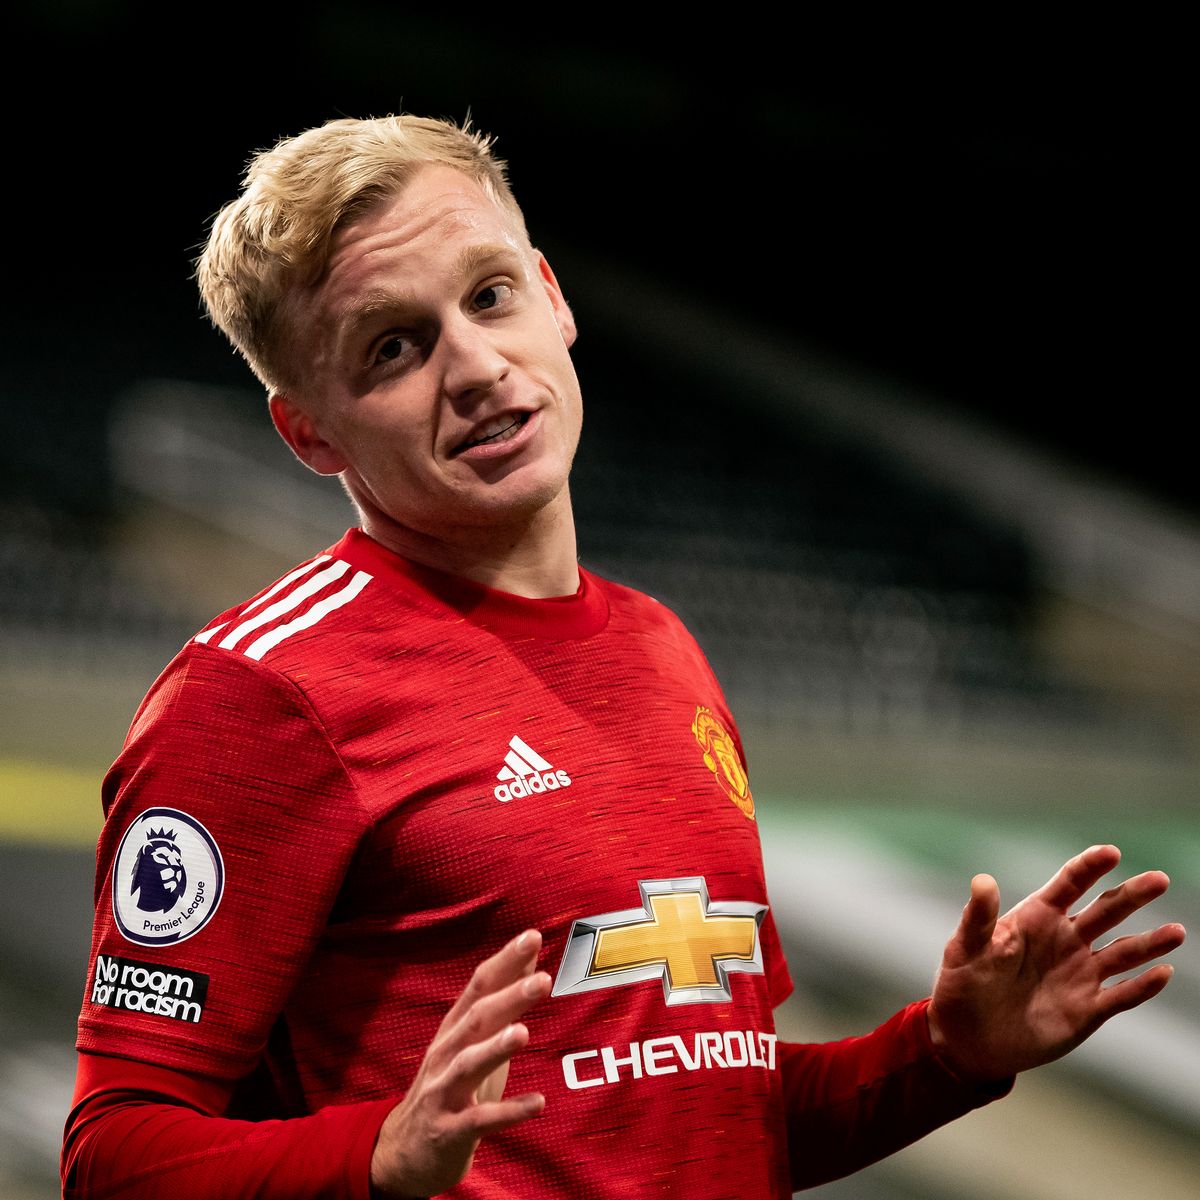 VAN DE BEEKAn intelligent footballer, still adapting. Sometimes plays the easy/safe pass but again, hasn't had much chance to get into a rhythm. Would benefit from playing with more creative wide players and a dedicated and reliable DM. His time will come.Verdict: KEEP